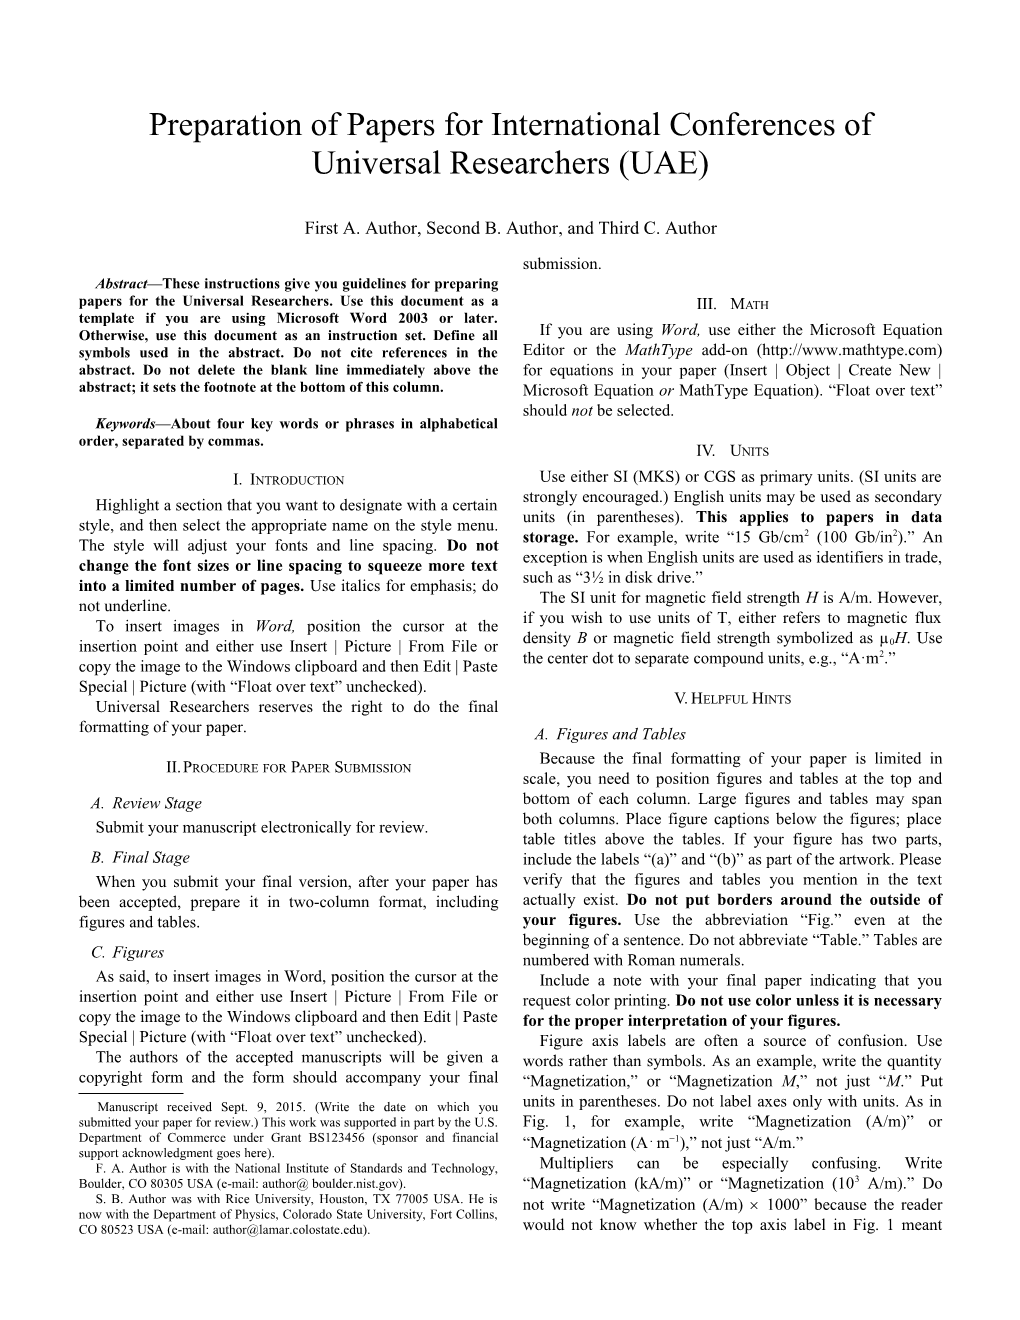 Preparation of Papers for International Conferences of Universal Researchers (UAE)